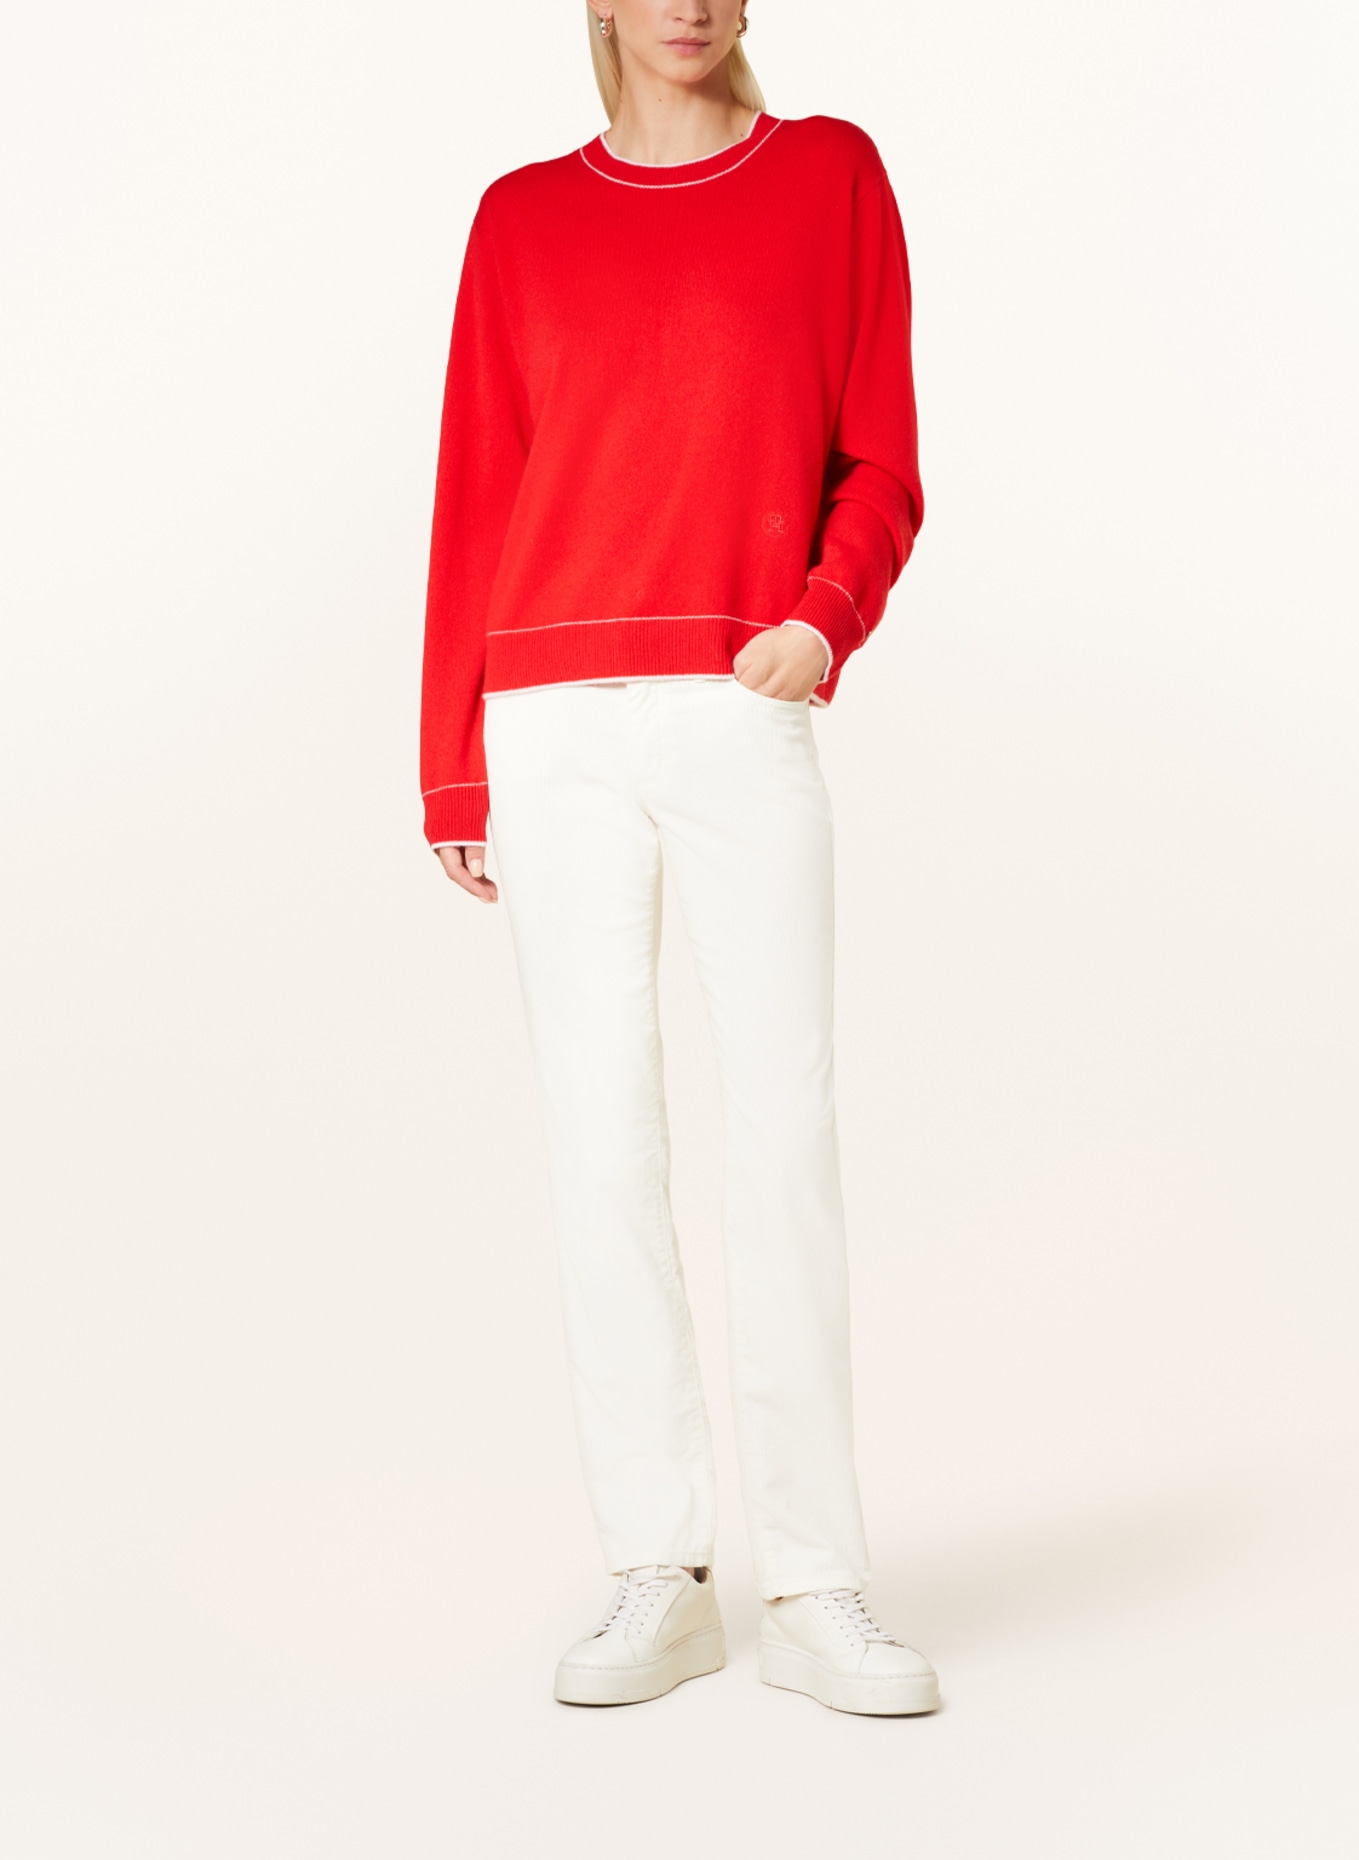 TOMMY HILFIGER Cashmere-Pullover, Farbe: ROT (Bild 2)